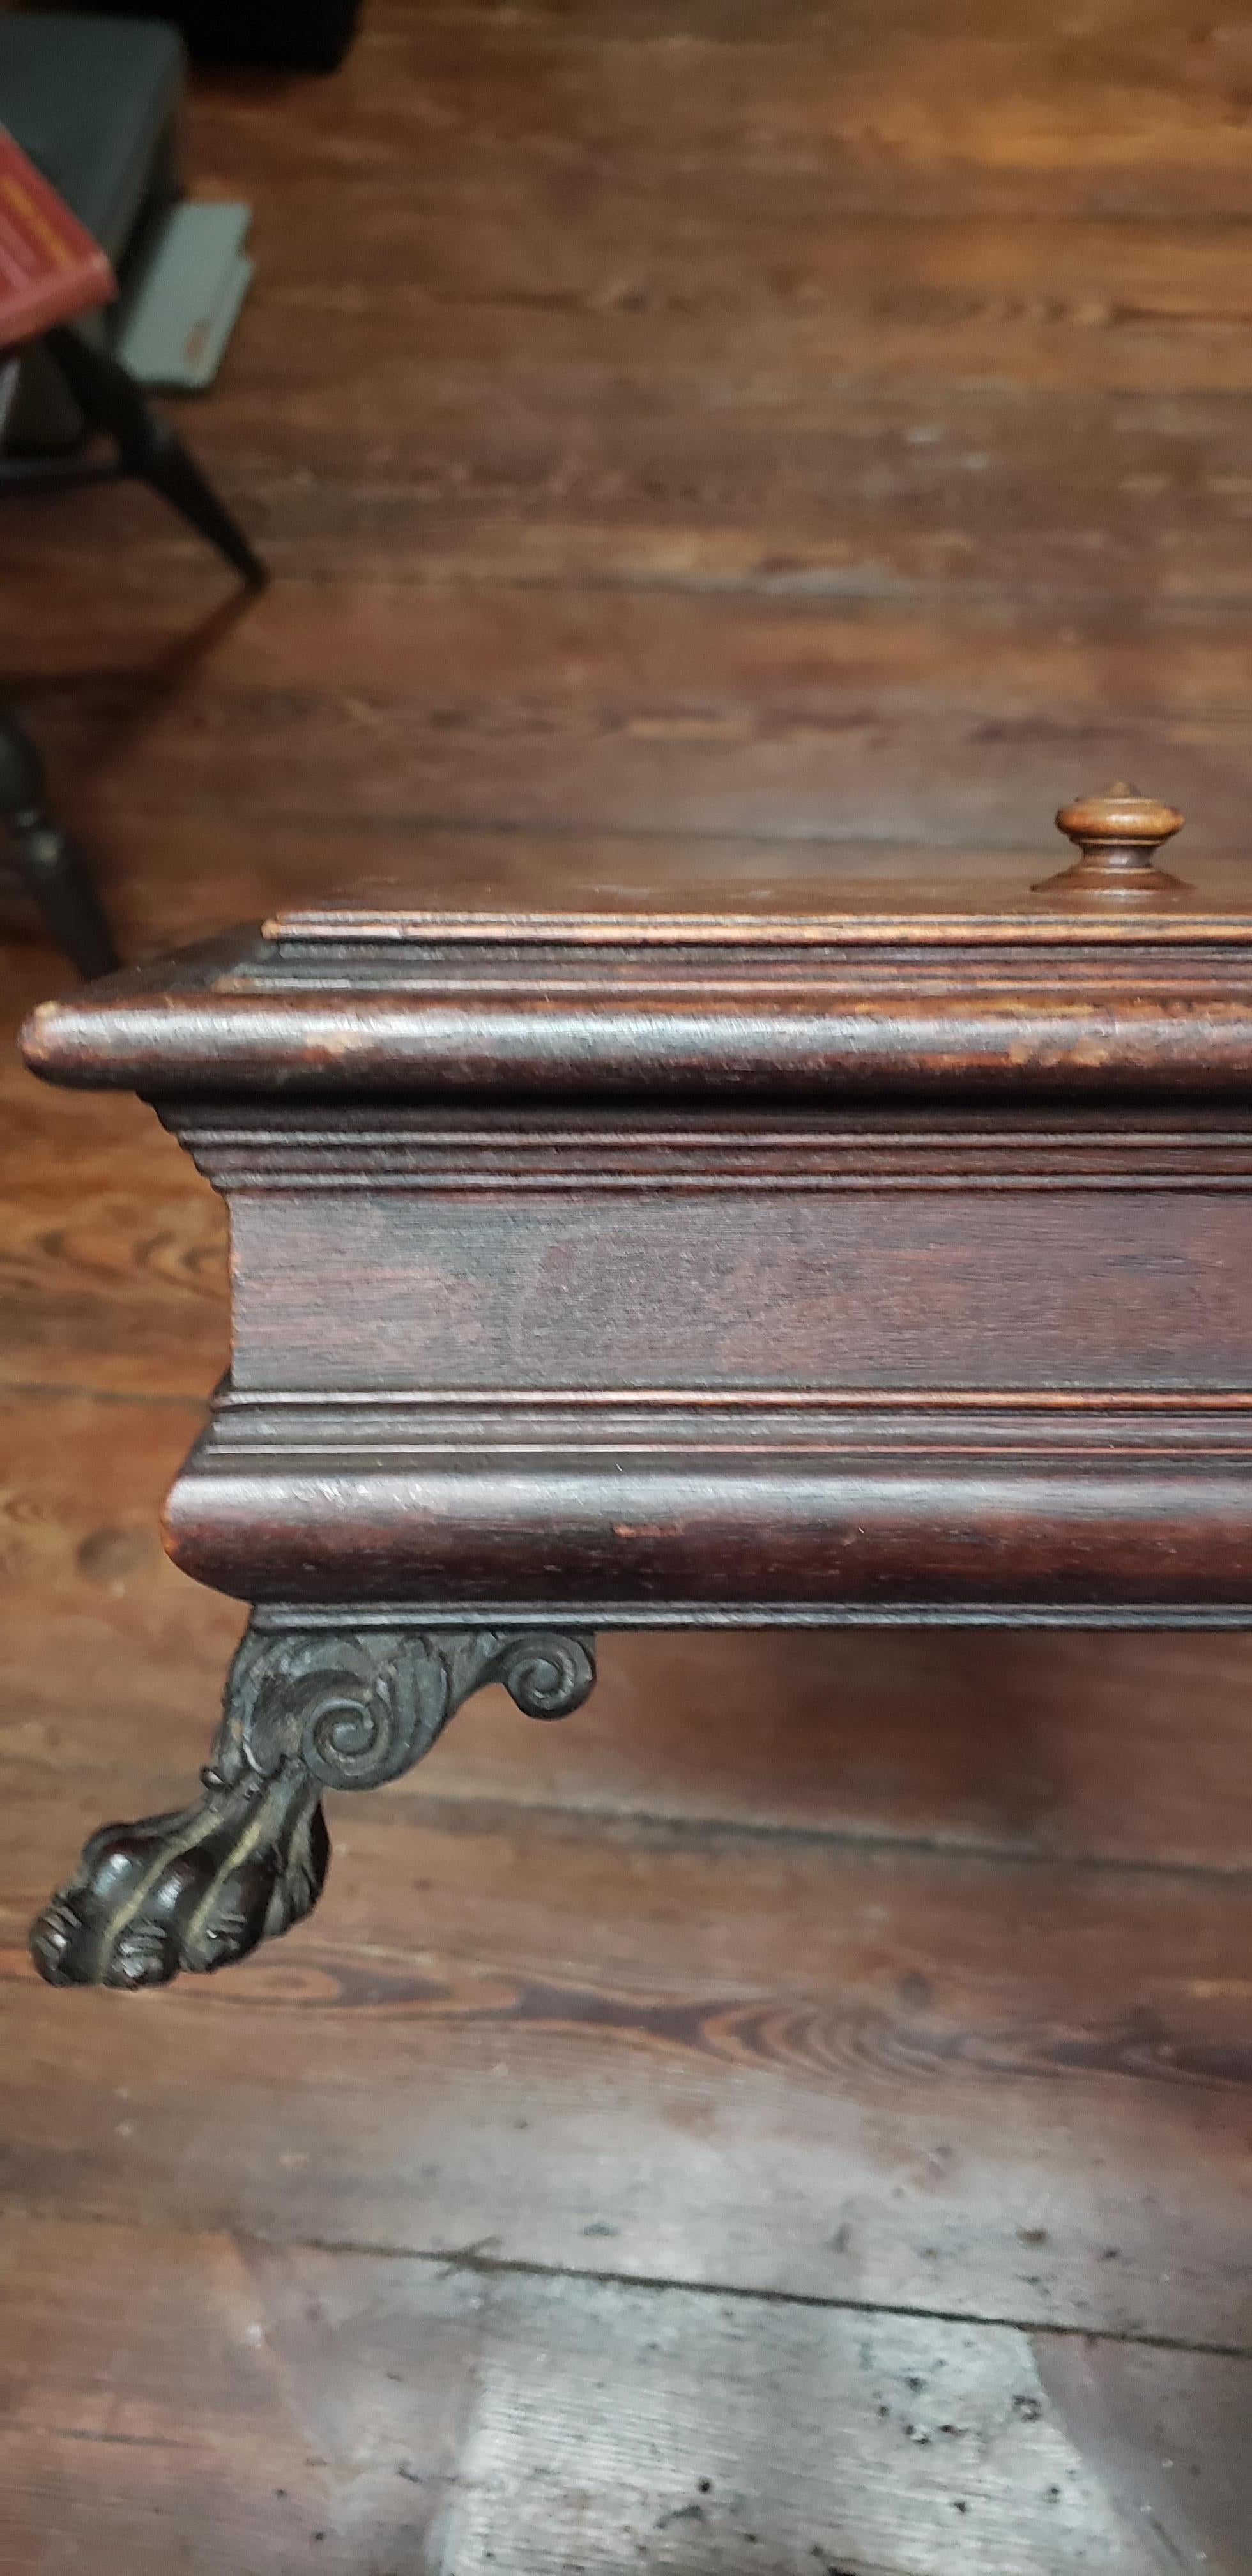 Late 19th Century Renaissance Revival Wooden Desk Top or Jewelry Box in Walnut